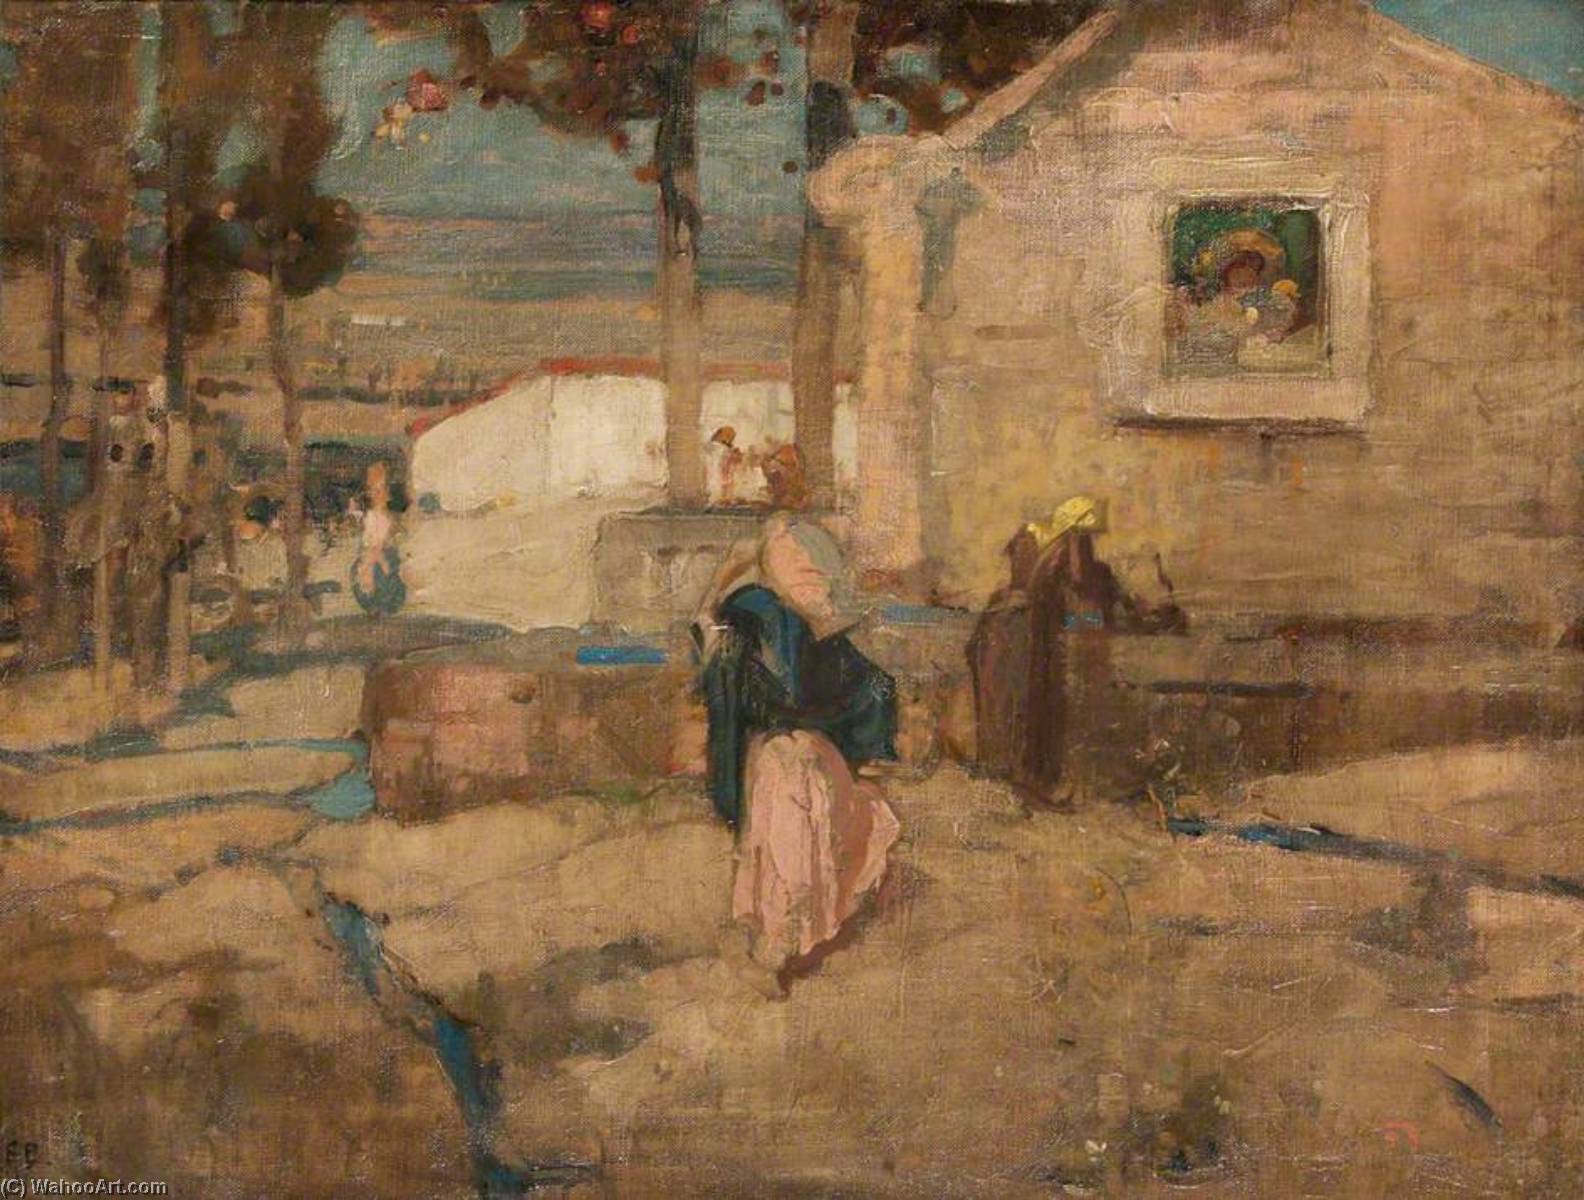 The Shrine at the Well, 1895 by Frank William Brangwyn Frank William Brangwyn | ArtsDot.com